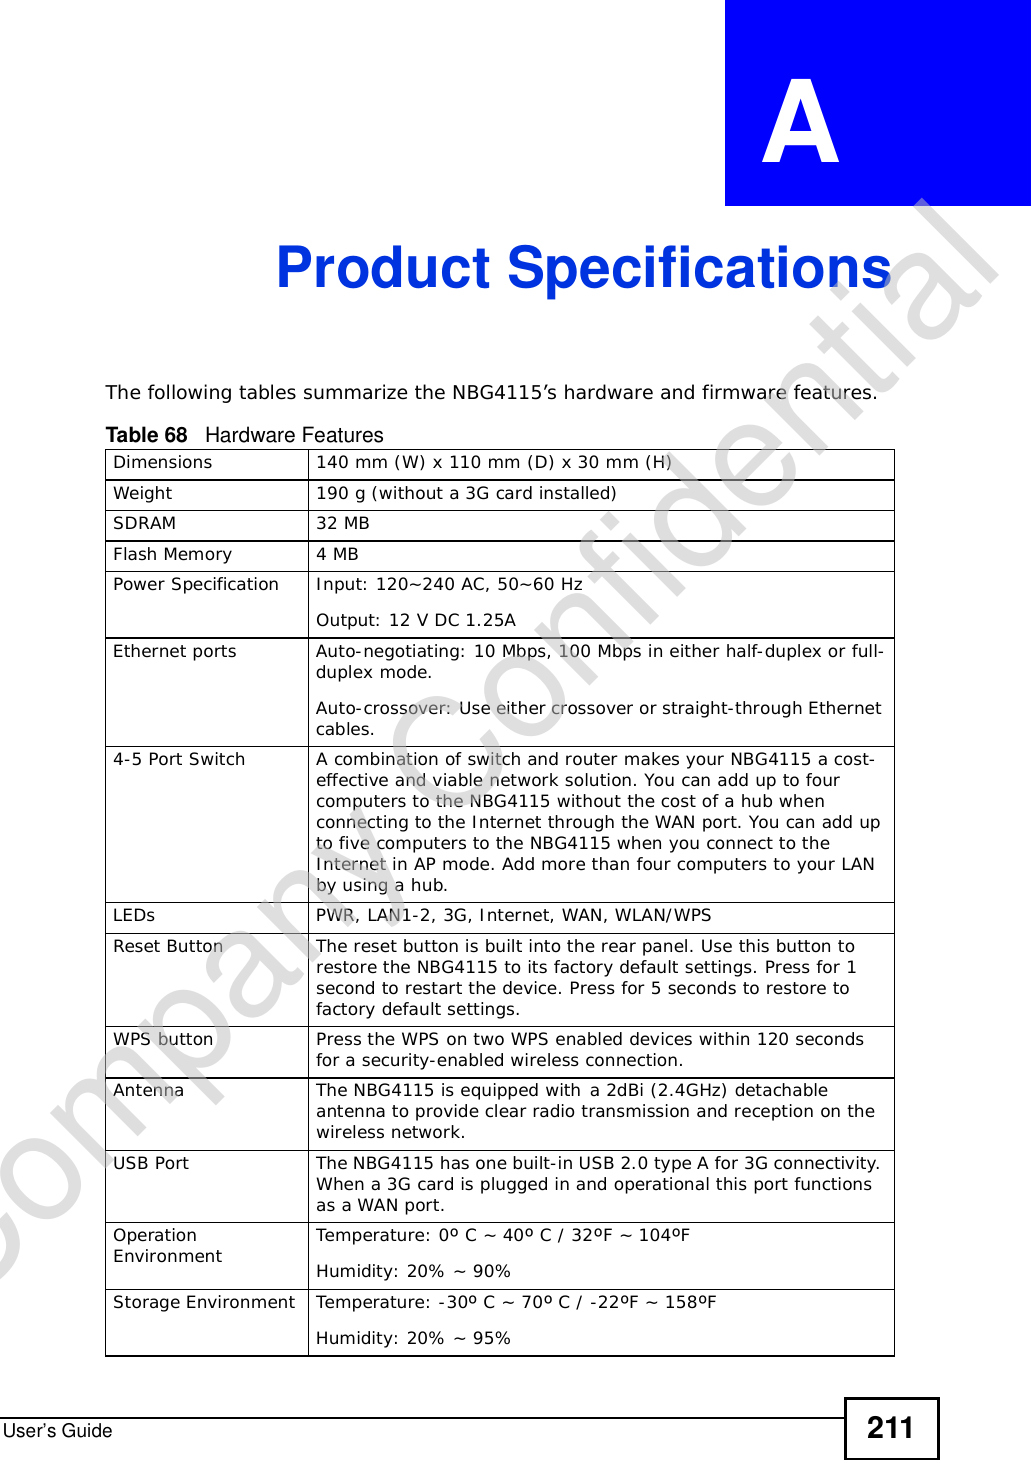 User’s Guide 211APPENDIX  A Product SpecificationsThe following tables summarize the NBG4115’s hardware and firmware features.Table 68   Hardware FeaturesDimensions 140 mm (W) x 110 mm (D) x 30 mm (H)Weight 190 g (without a 3G card installed)SDRAM 32 MBFlash Memory 4 MBPower Specification Input: 120~240 AC, 50~60 HzOutput: 12 V DC 1.25AEthernet portsAuto-negotiating: 10 Mbps, 100 Mbps in either half-duplex or full-duplex mode.Auto-crossover: Use either crossover or straight-through Ethernet cables.4-5 Port Switch A combination of switch and router makes your NBG4115 a cost-effective and viable network solution. You can add up to four computers to the NBG4115 without the cost of a hub when connecting to the Internet through the WAN port. You can add up to five computers to the NBG4115 when you connect to the Internet in AP mode. Add more than four computers to your LAN by using a hub.LEDsPWR, LAN1-2, 3G, Internet, WAN, WLAN/WPSReset Button The reset button is built into the rear panel. Use this button to restore the NBG4115 to its factory default settings. Press for 1 second to restart the device. Press for 5 seconds to restore to factory default settings.WPS button Press the WPS on two WPS enabled devices within 120 seconds for a security-enabled wireless connection.Antenna The NBG4115 is equipped witha 2dBi (2.4GHz) detachable antenna to provide clear radio transmission and reception on the wireless network. USB Port The NBG4115 has one built-in USB 2.0 type A for 3G connectivity. When a 3G card is plugged in and operational this port functions as a WAN port.Operation Environment Temperature: 0º C ~ 40º C / 32ºF ~ 104ºFHumidity: 20% ~ 90% Storage Environment Temperature: -30º C ~ 70º C / -22ºF ~ 158ºFHumidity: 20% ~ 95% Company Confidential